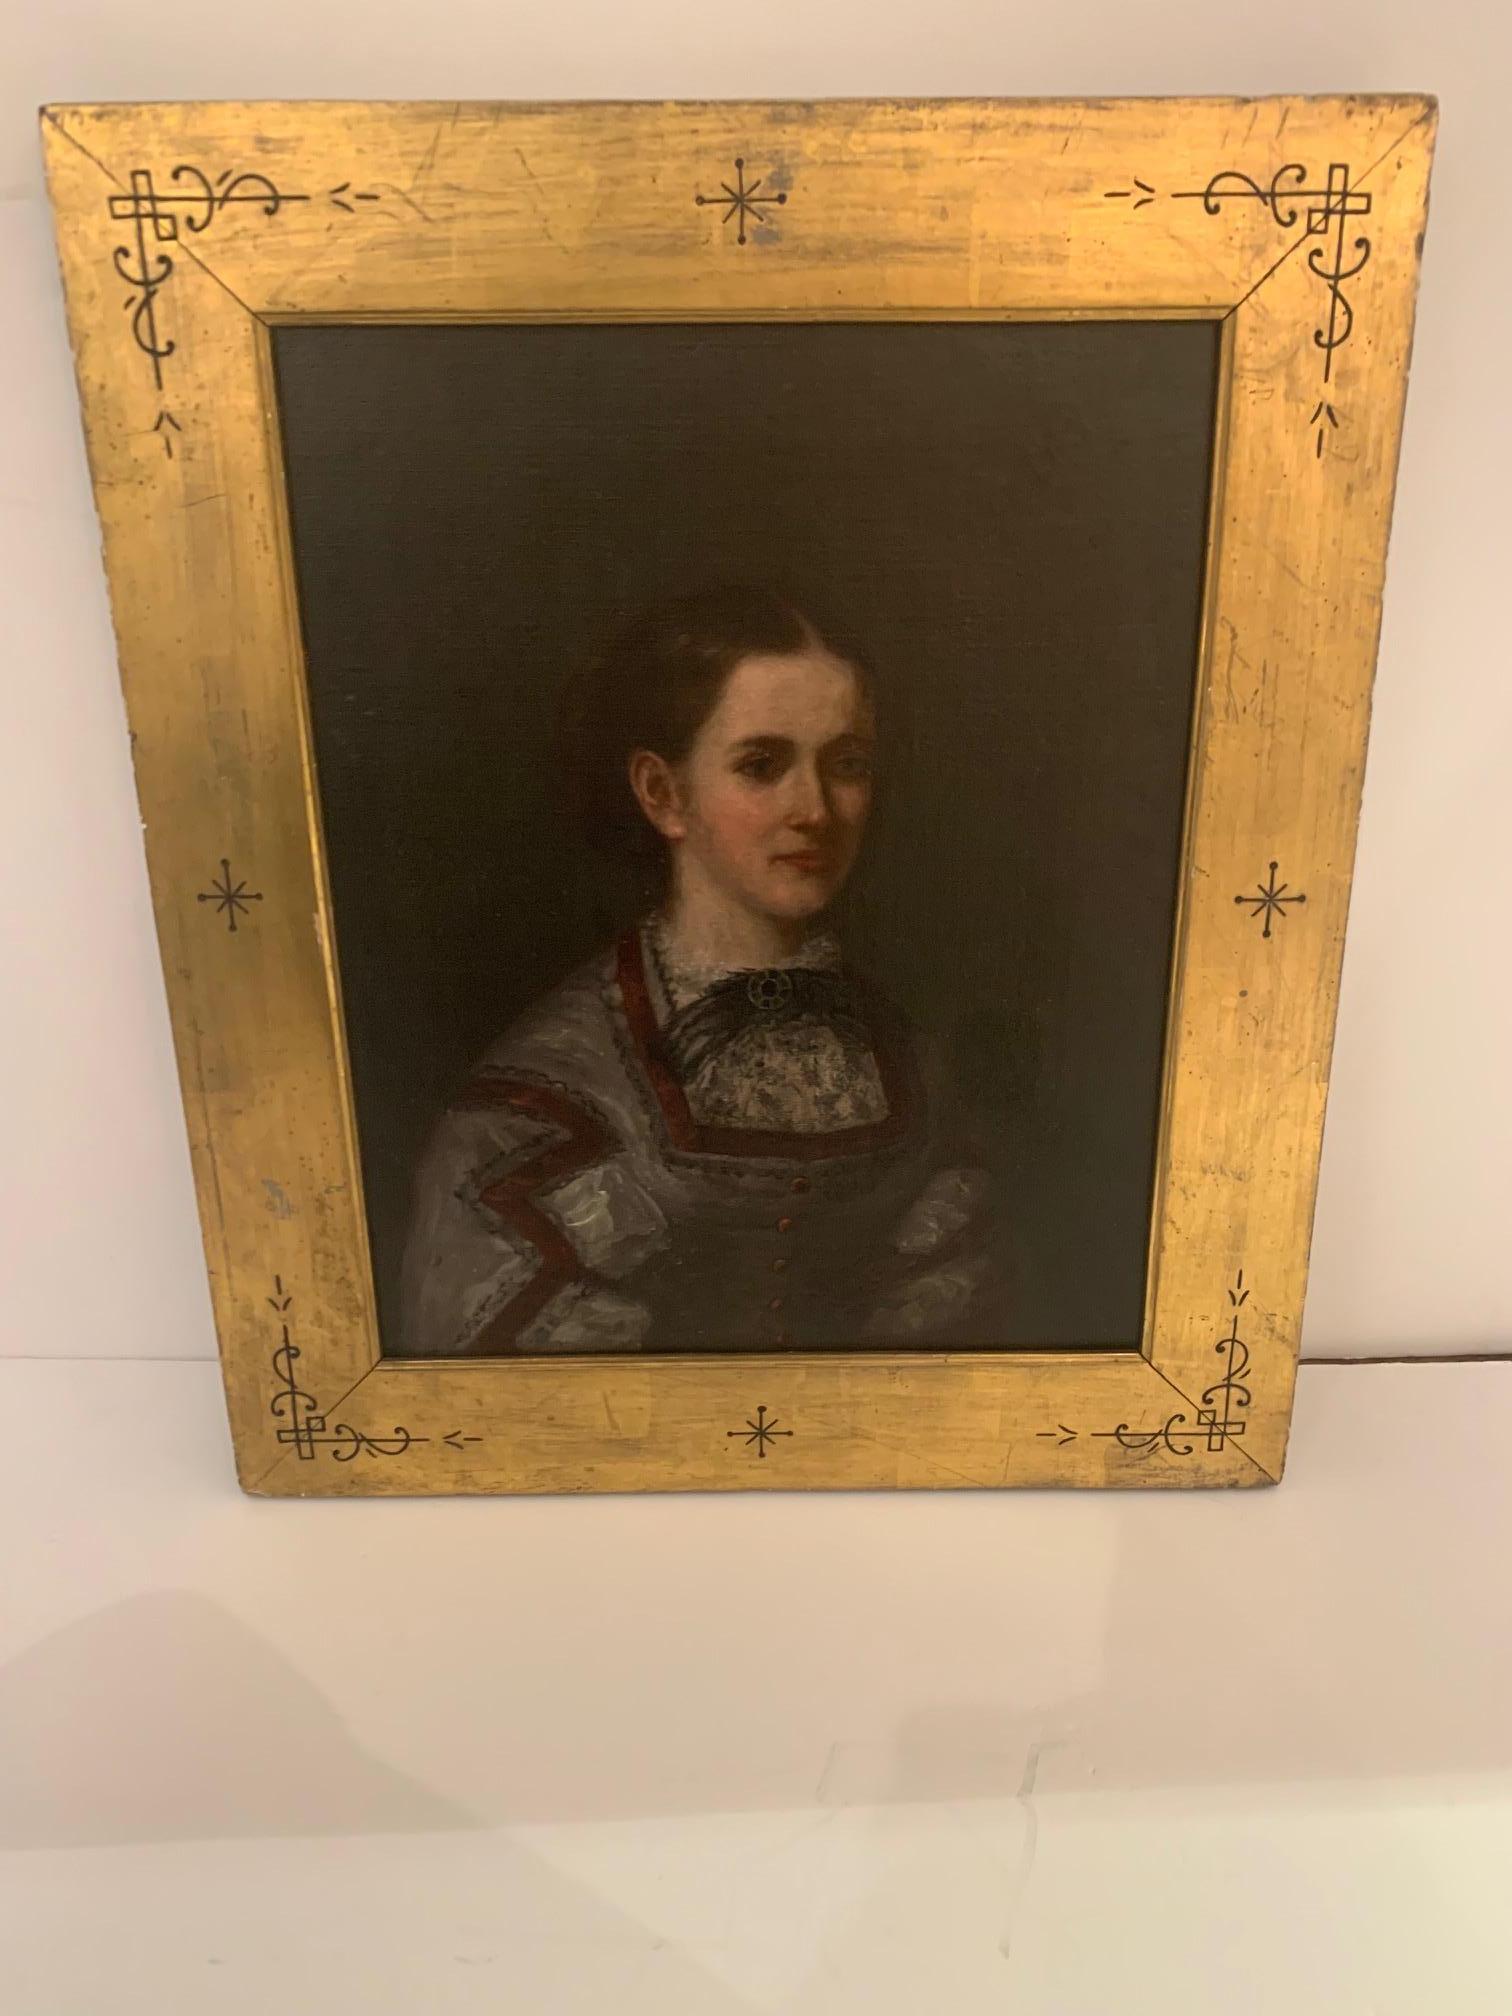 Impressive antique pair of beautifully rendered portraits, moody realism against dark chiaroscuro backgrounds, gorgeously framed in giltwood moldings having simple carved hieroglyphic like decoration.
One portrait is a side view of a child holding